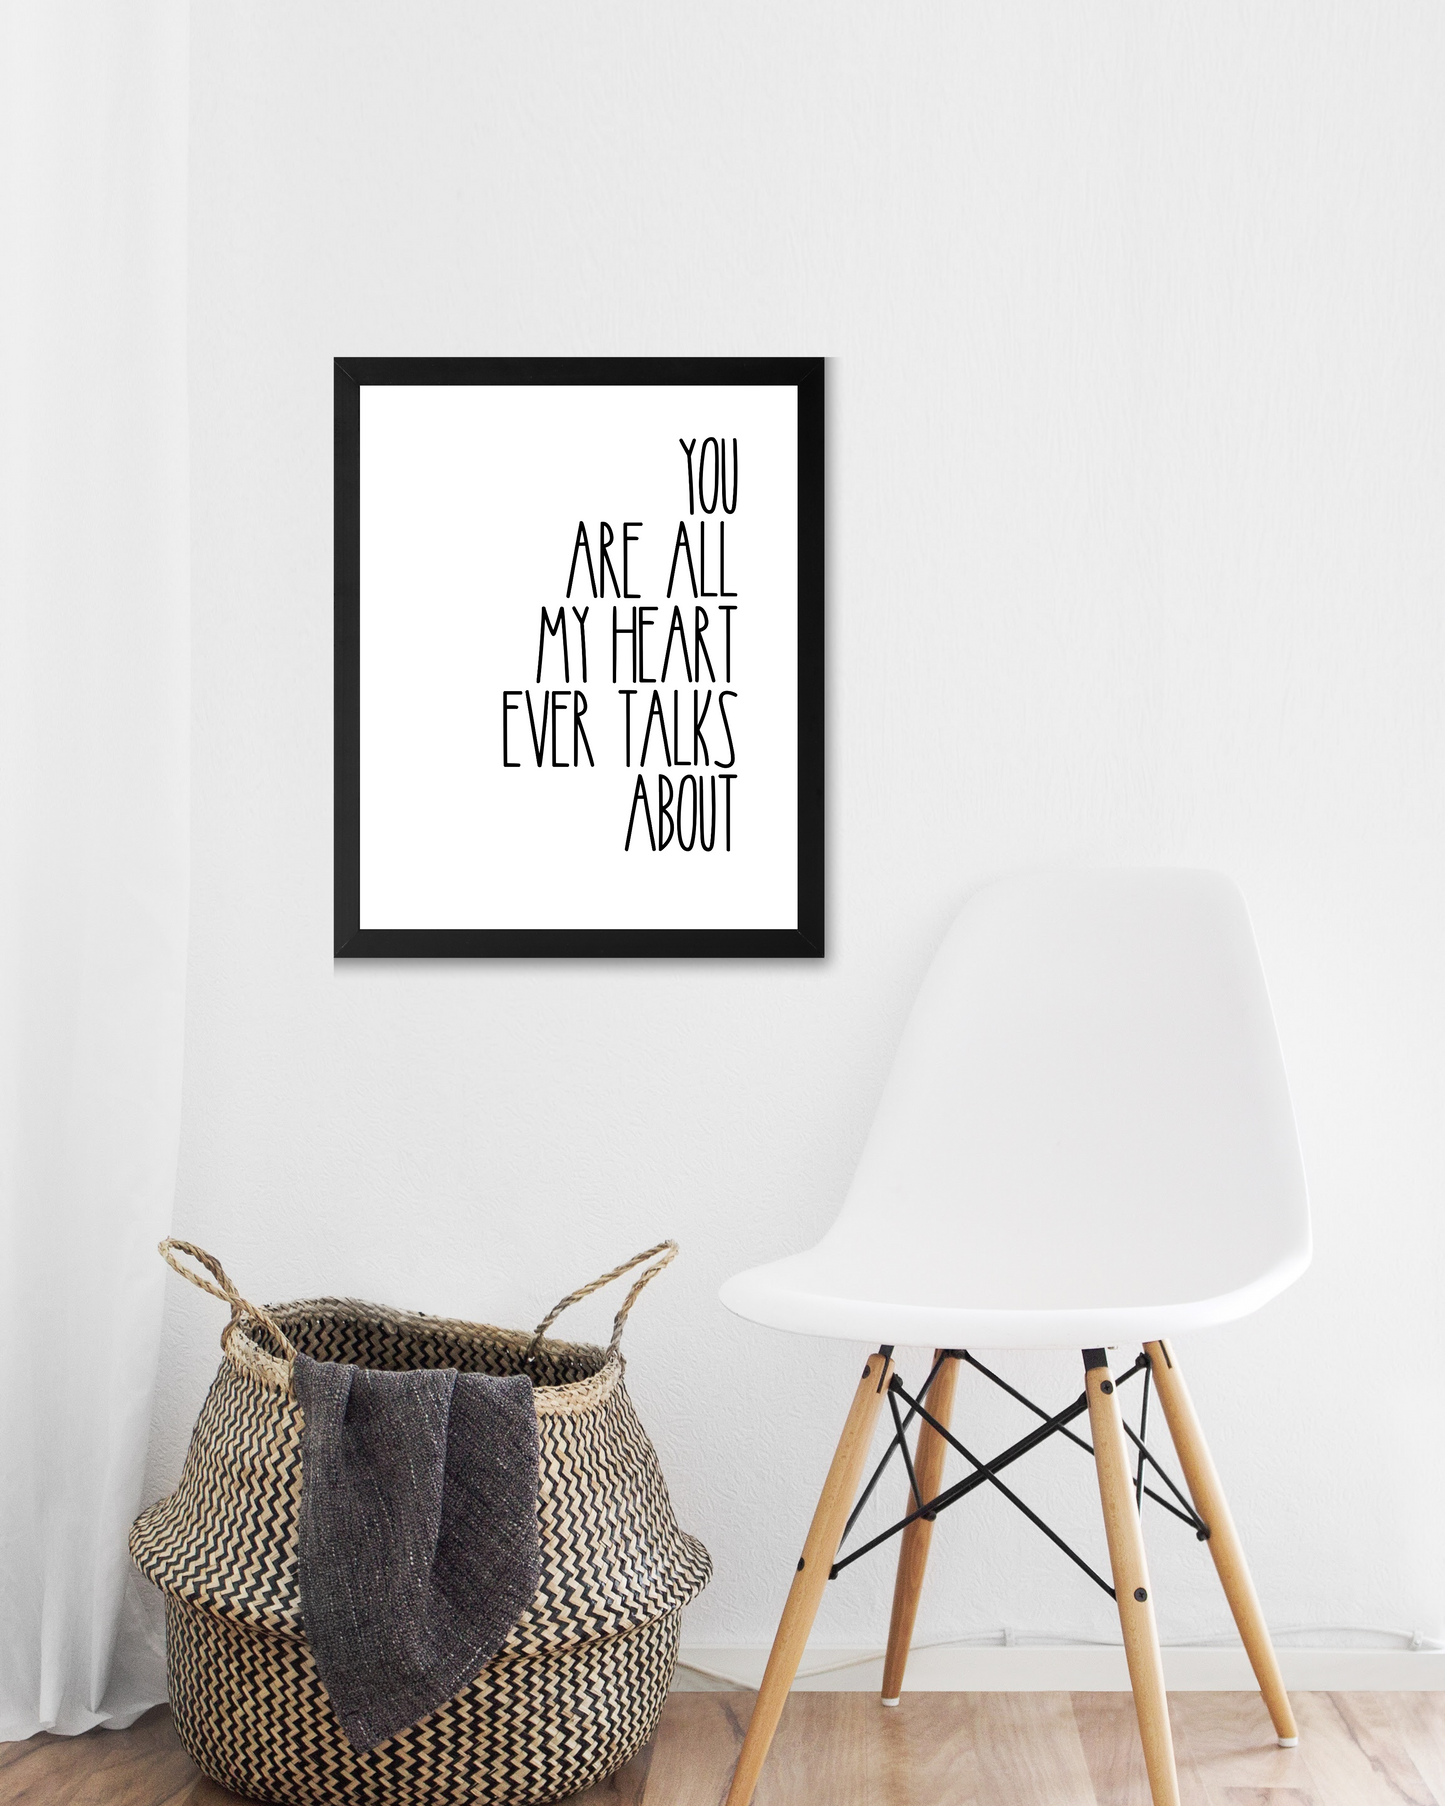 "You Are All My Heart Ever Talks About" Rae Dunn Inspired, Love Quotes, Printable Art